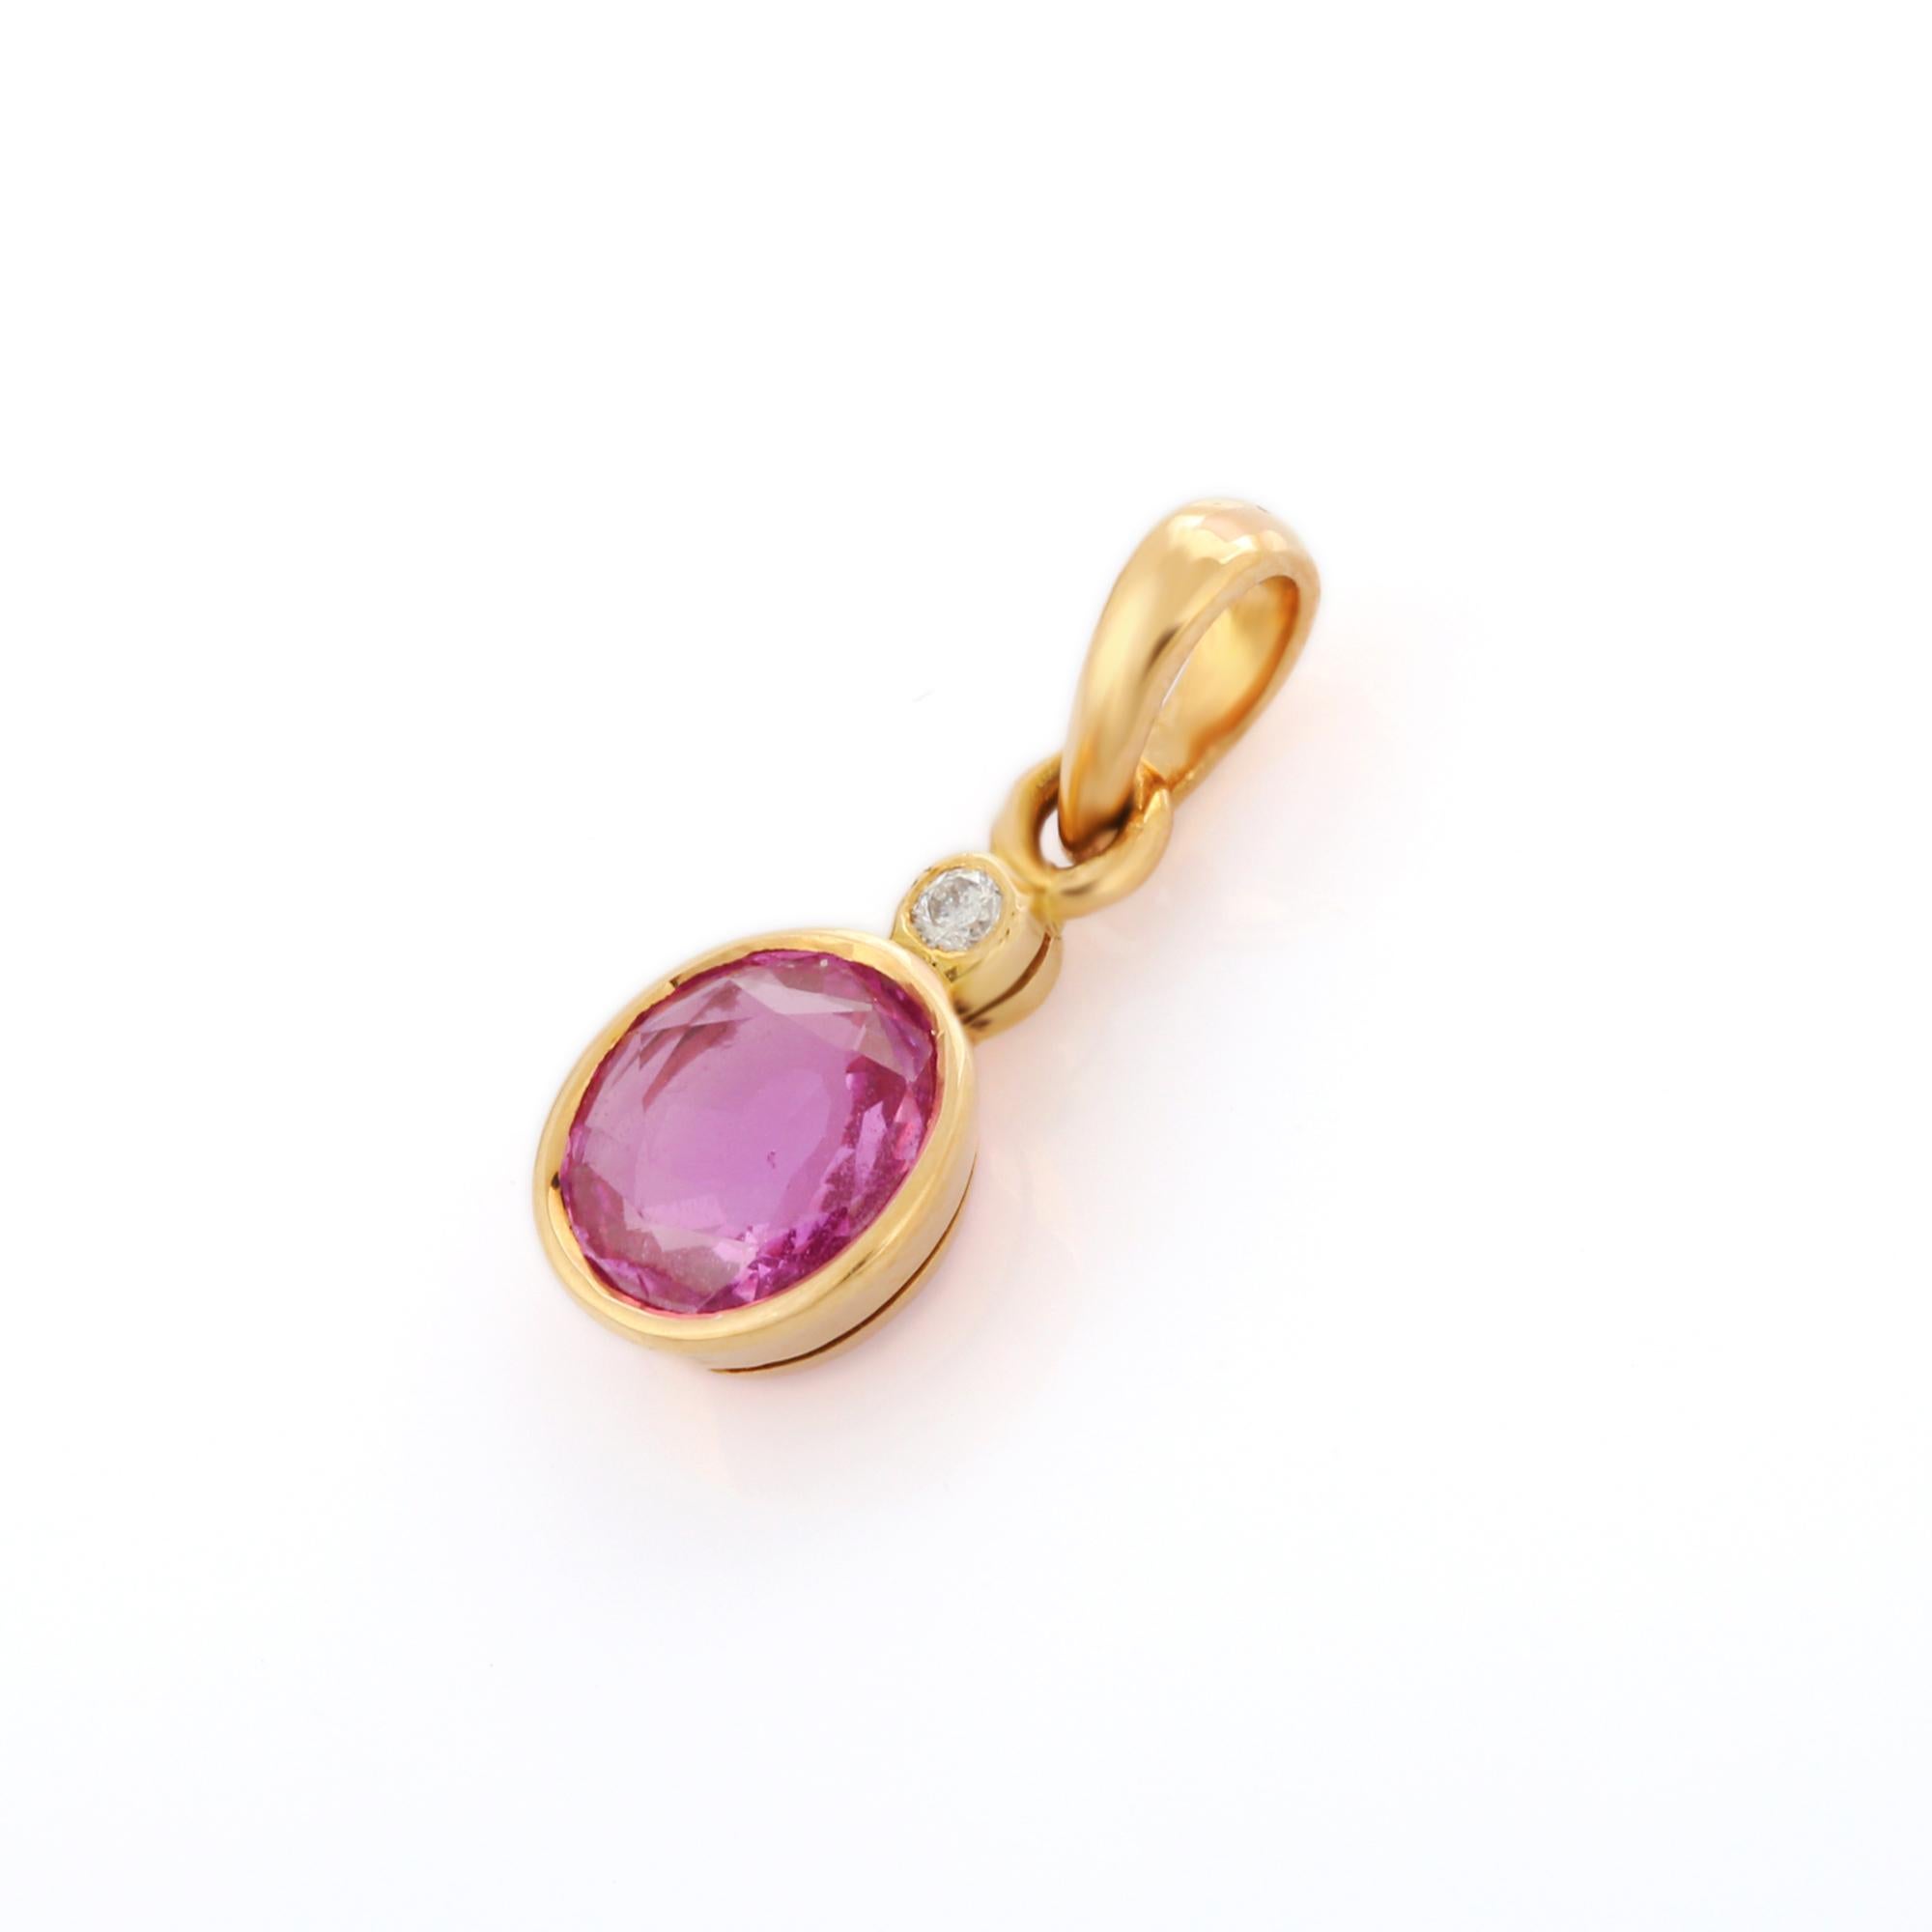 Pink sapphire and diamond pendant in 18K Gold. It has a oval cut sapphire studded with diamond that completes your look with a decent touch. Pendants are used to wear or gifted to represent love and promises. It's an attractive jewelry piece that